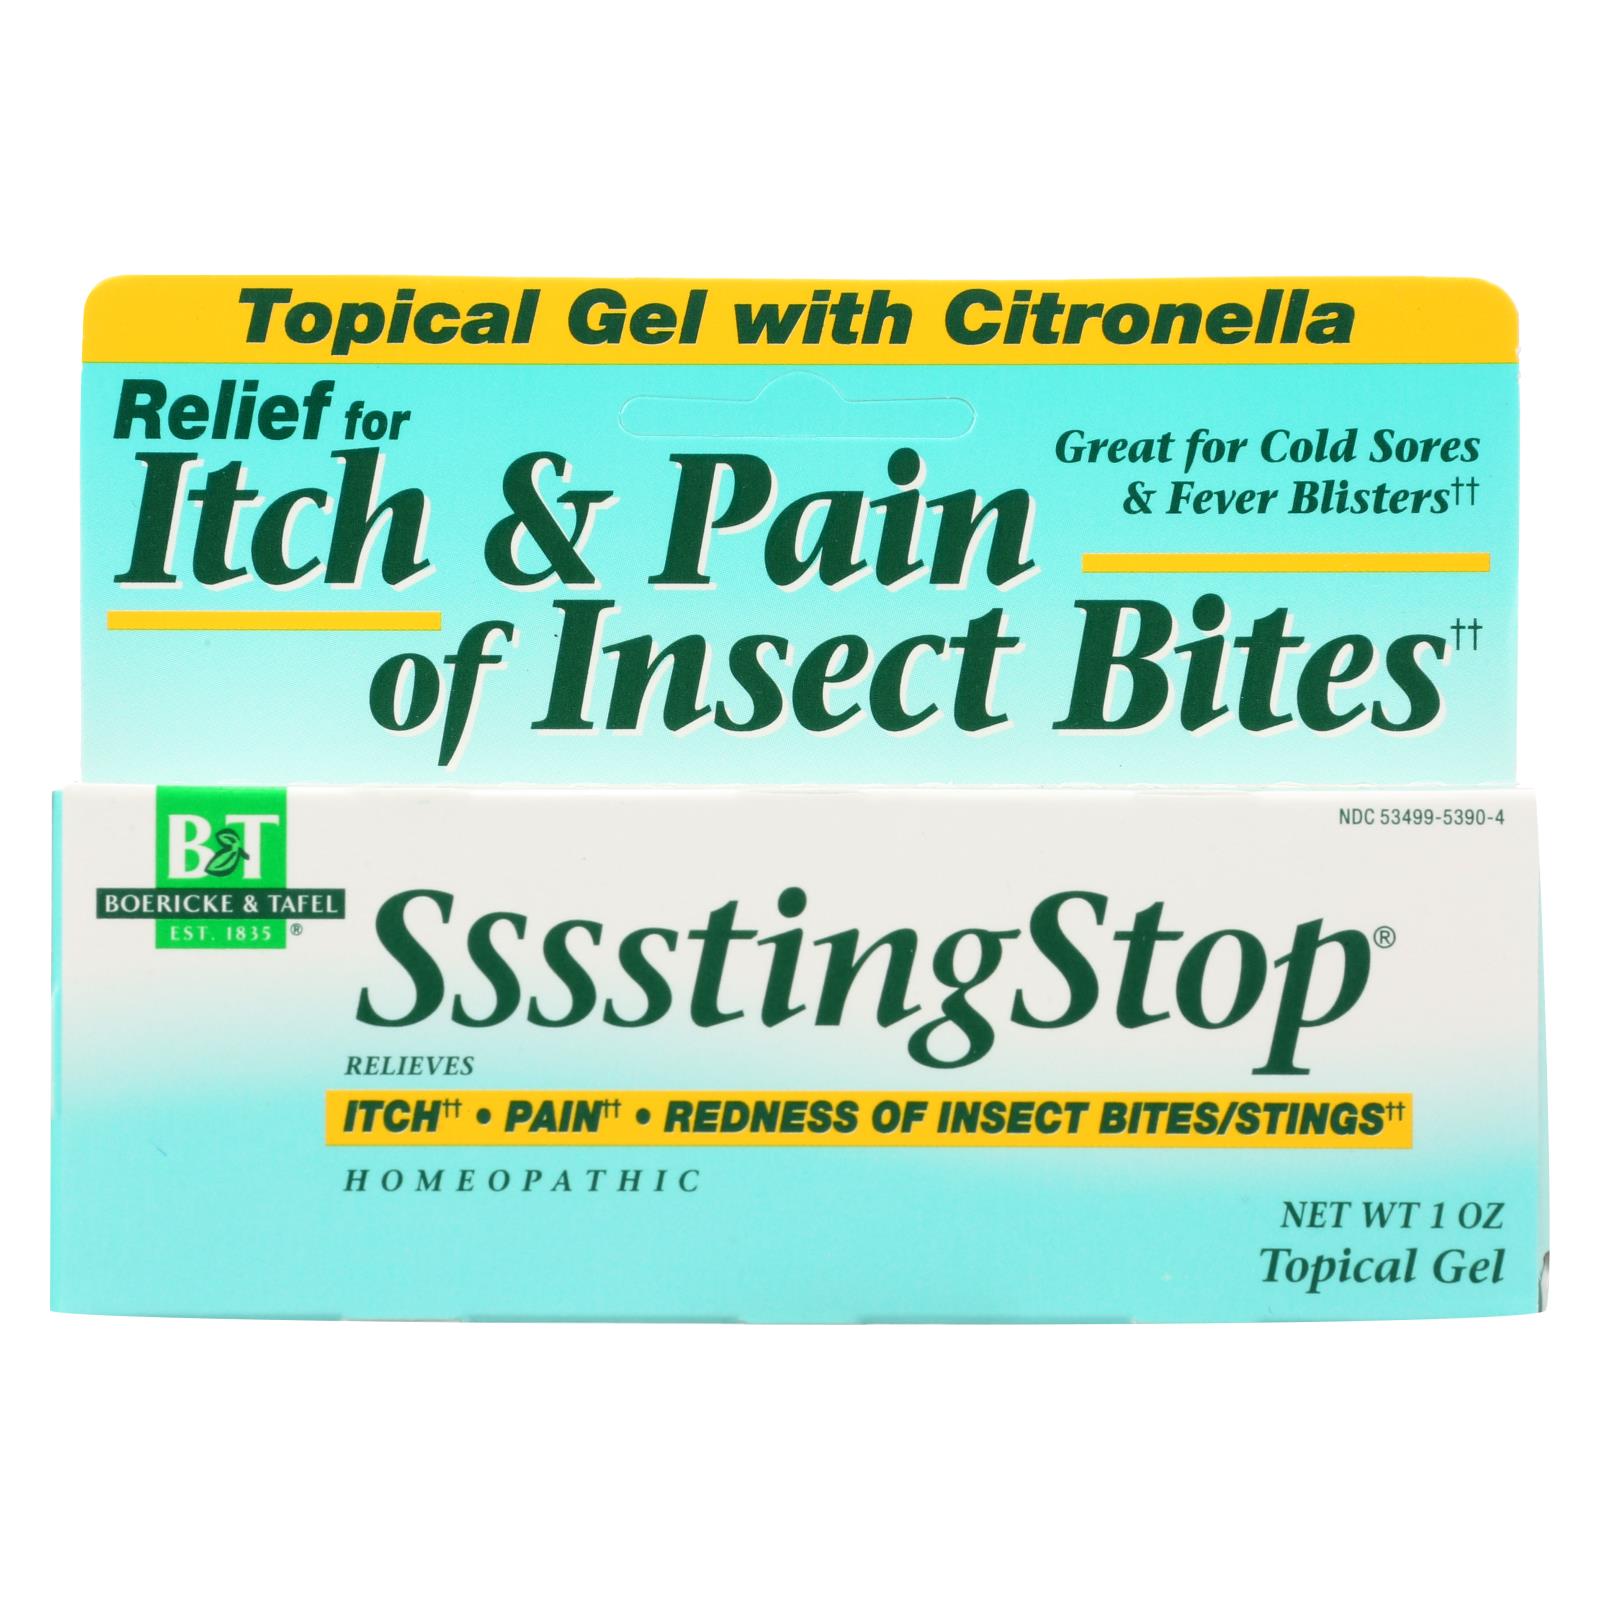 Boericke and Tafel - SssstingStop Topical Gel - with Citronella - 1 oz.